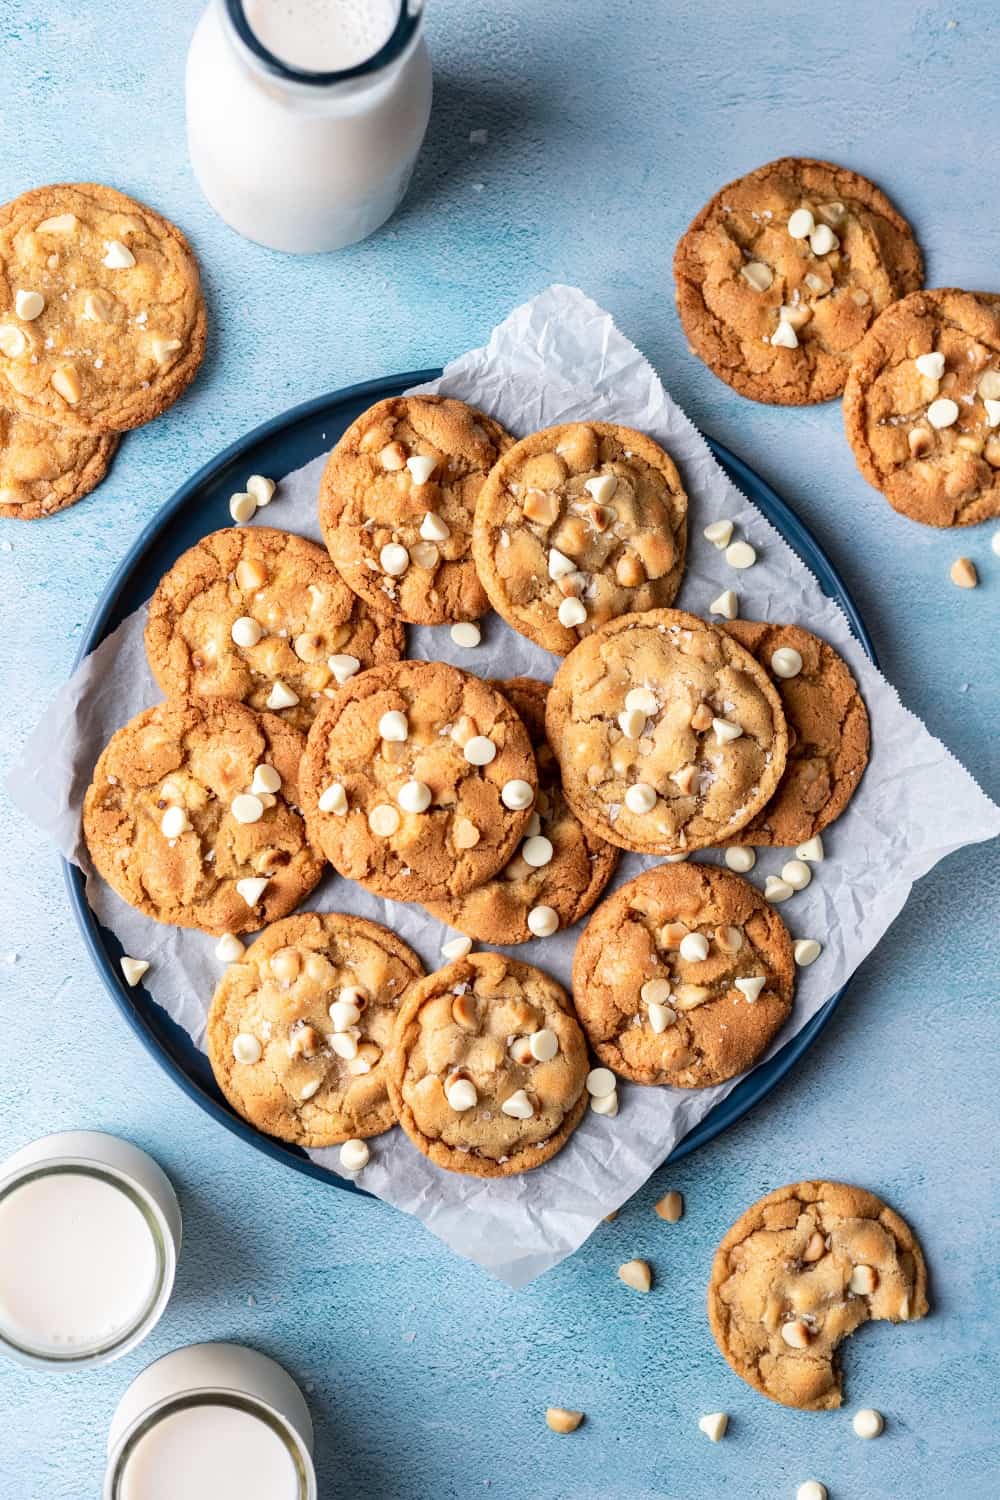 White chocolate macadamia cookies on a blue serving plate.